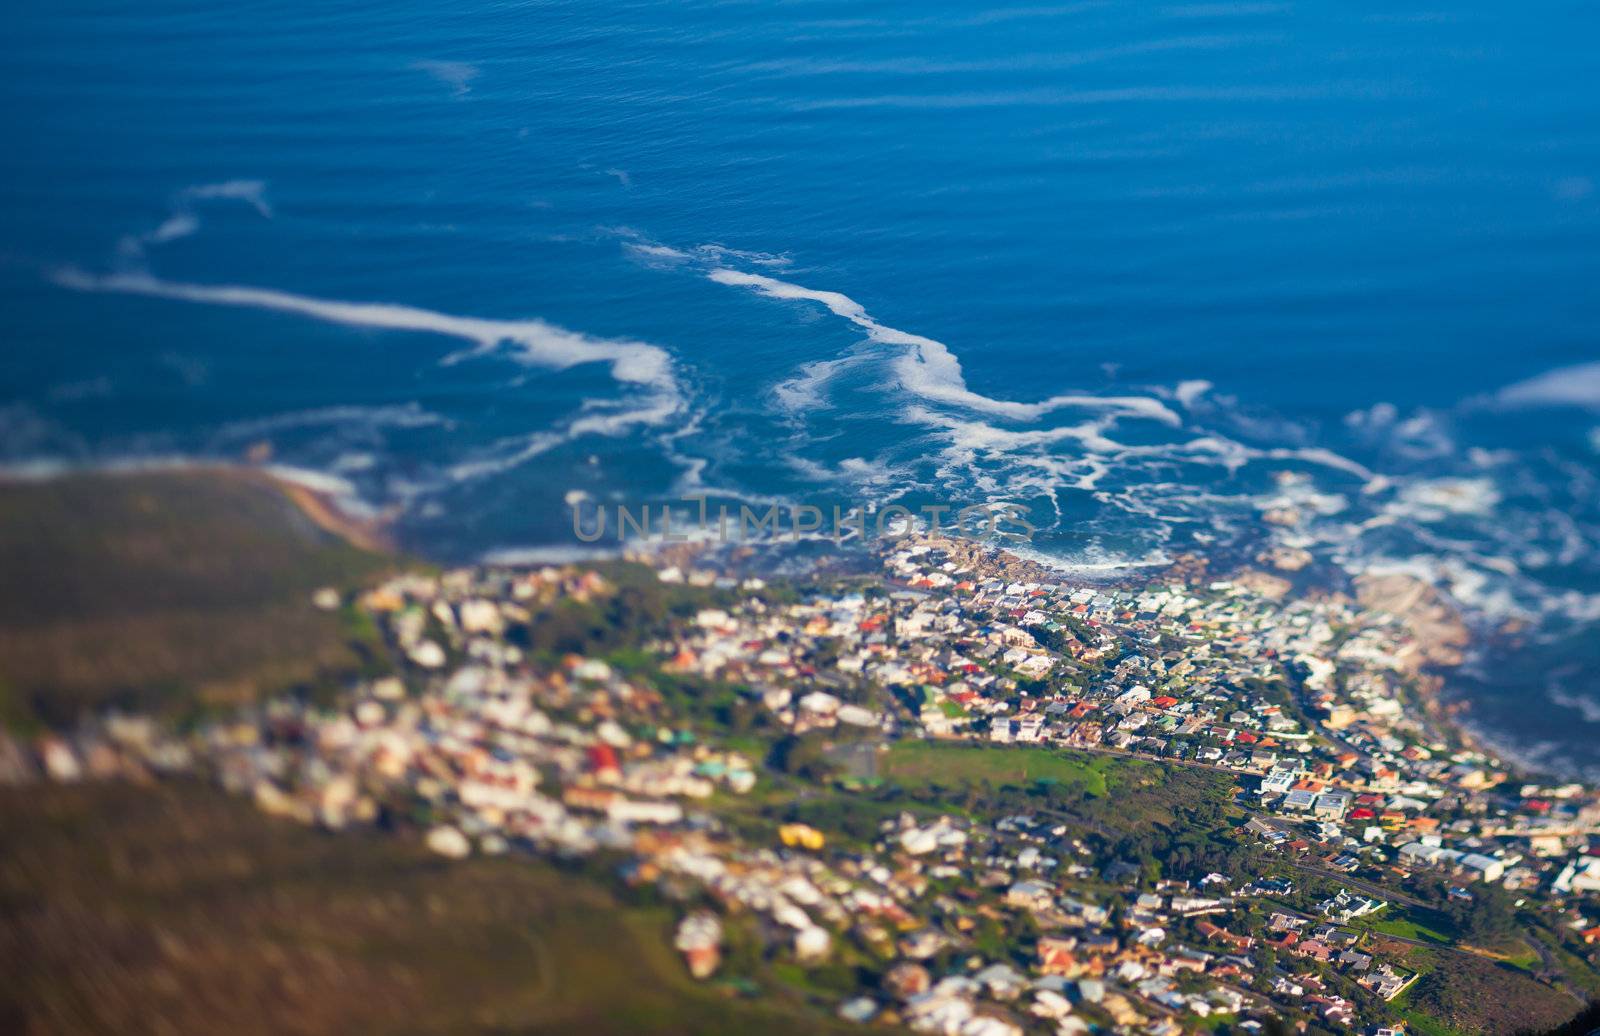 Camps Bay, Cape Town seen from a high angle